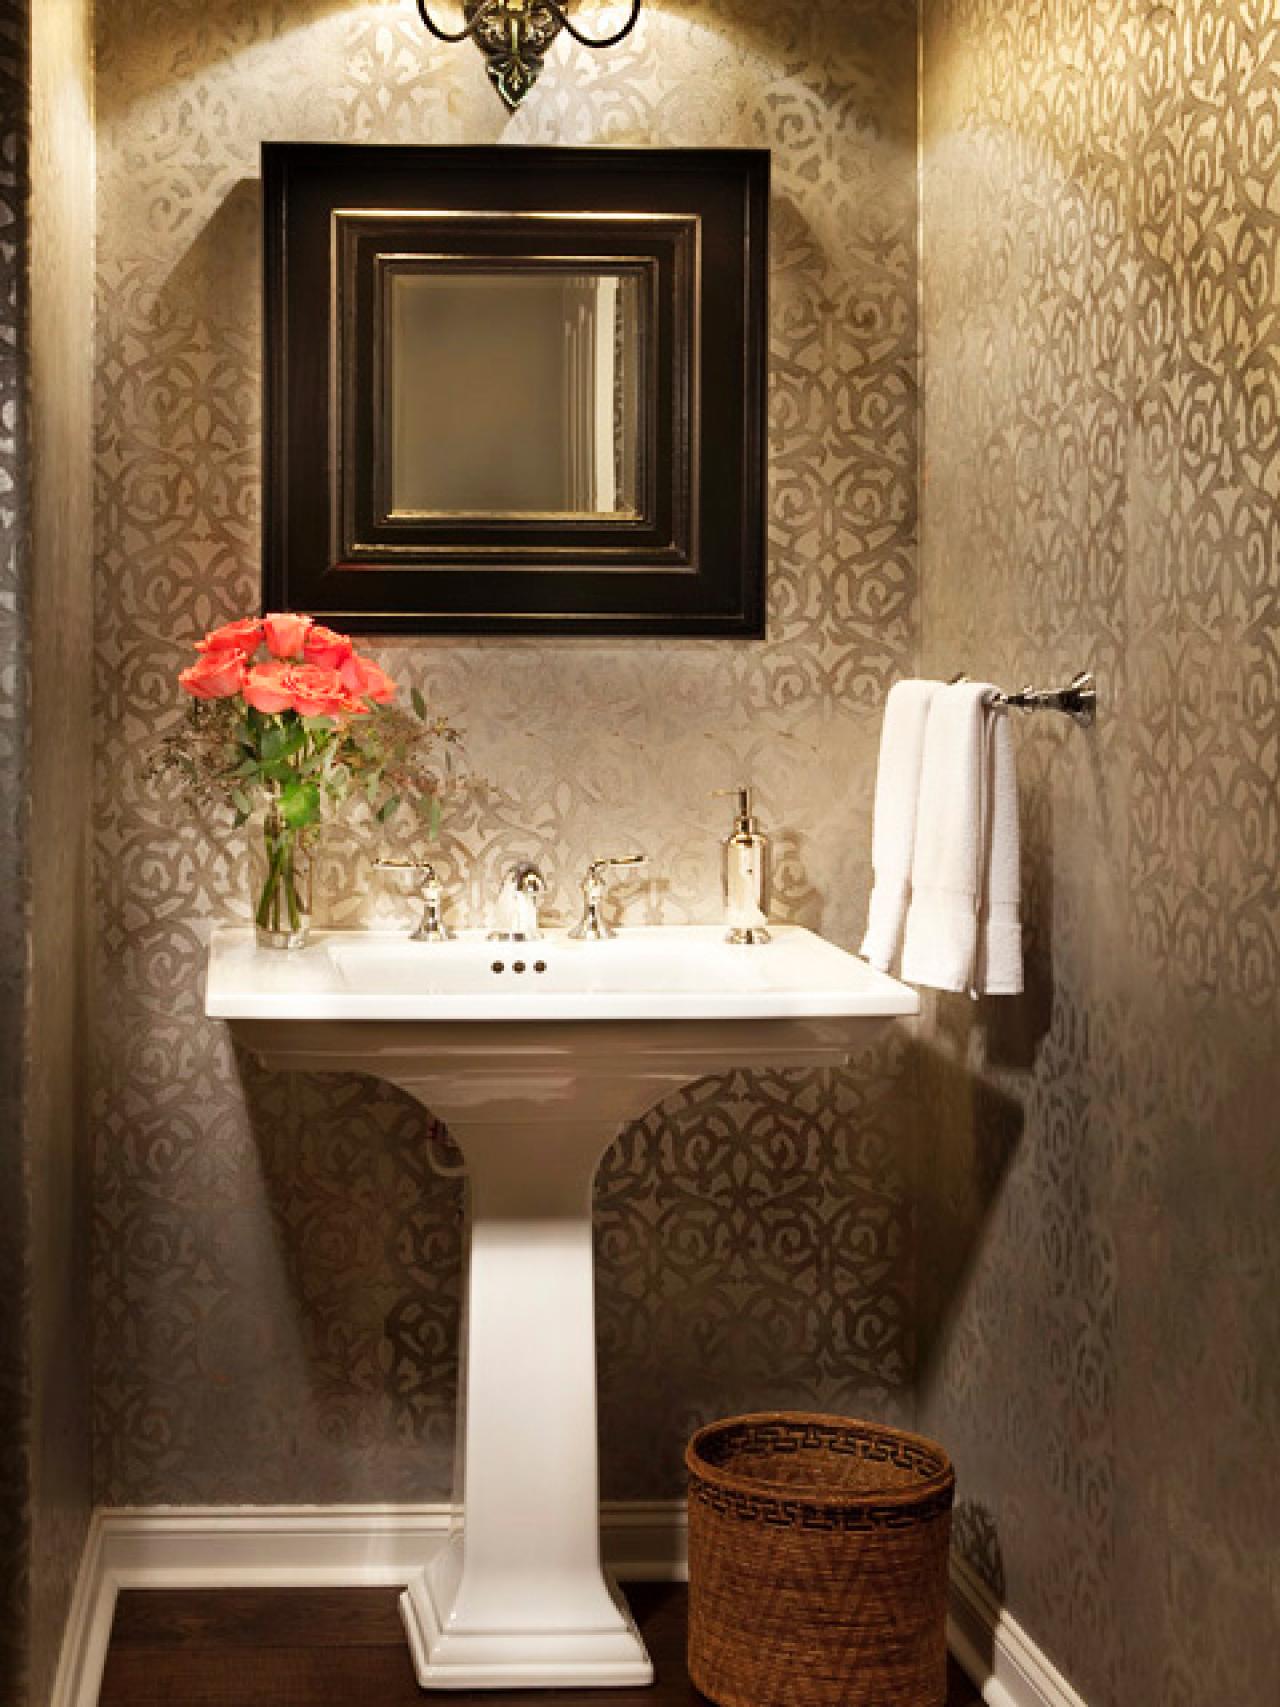 Bathroom With Patterned Wallpaper The Tone On